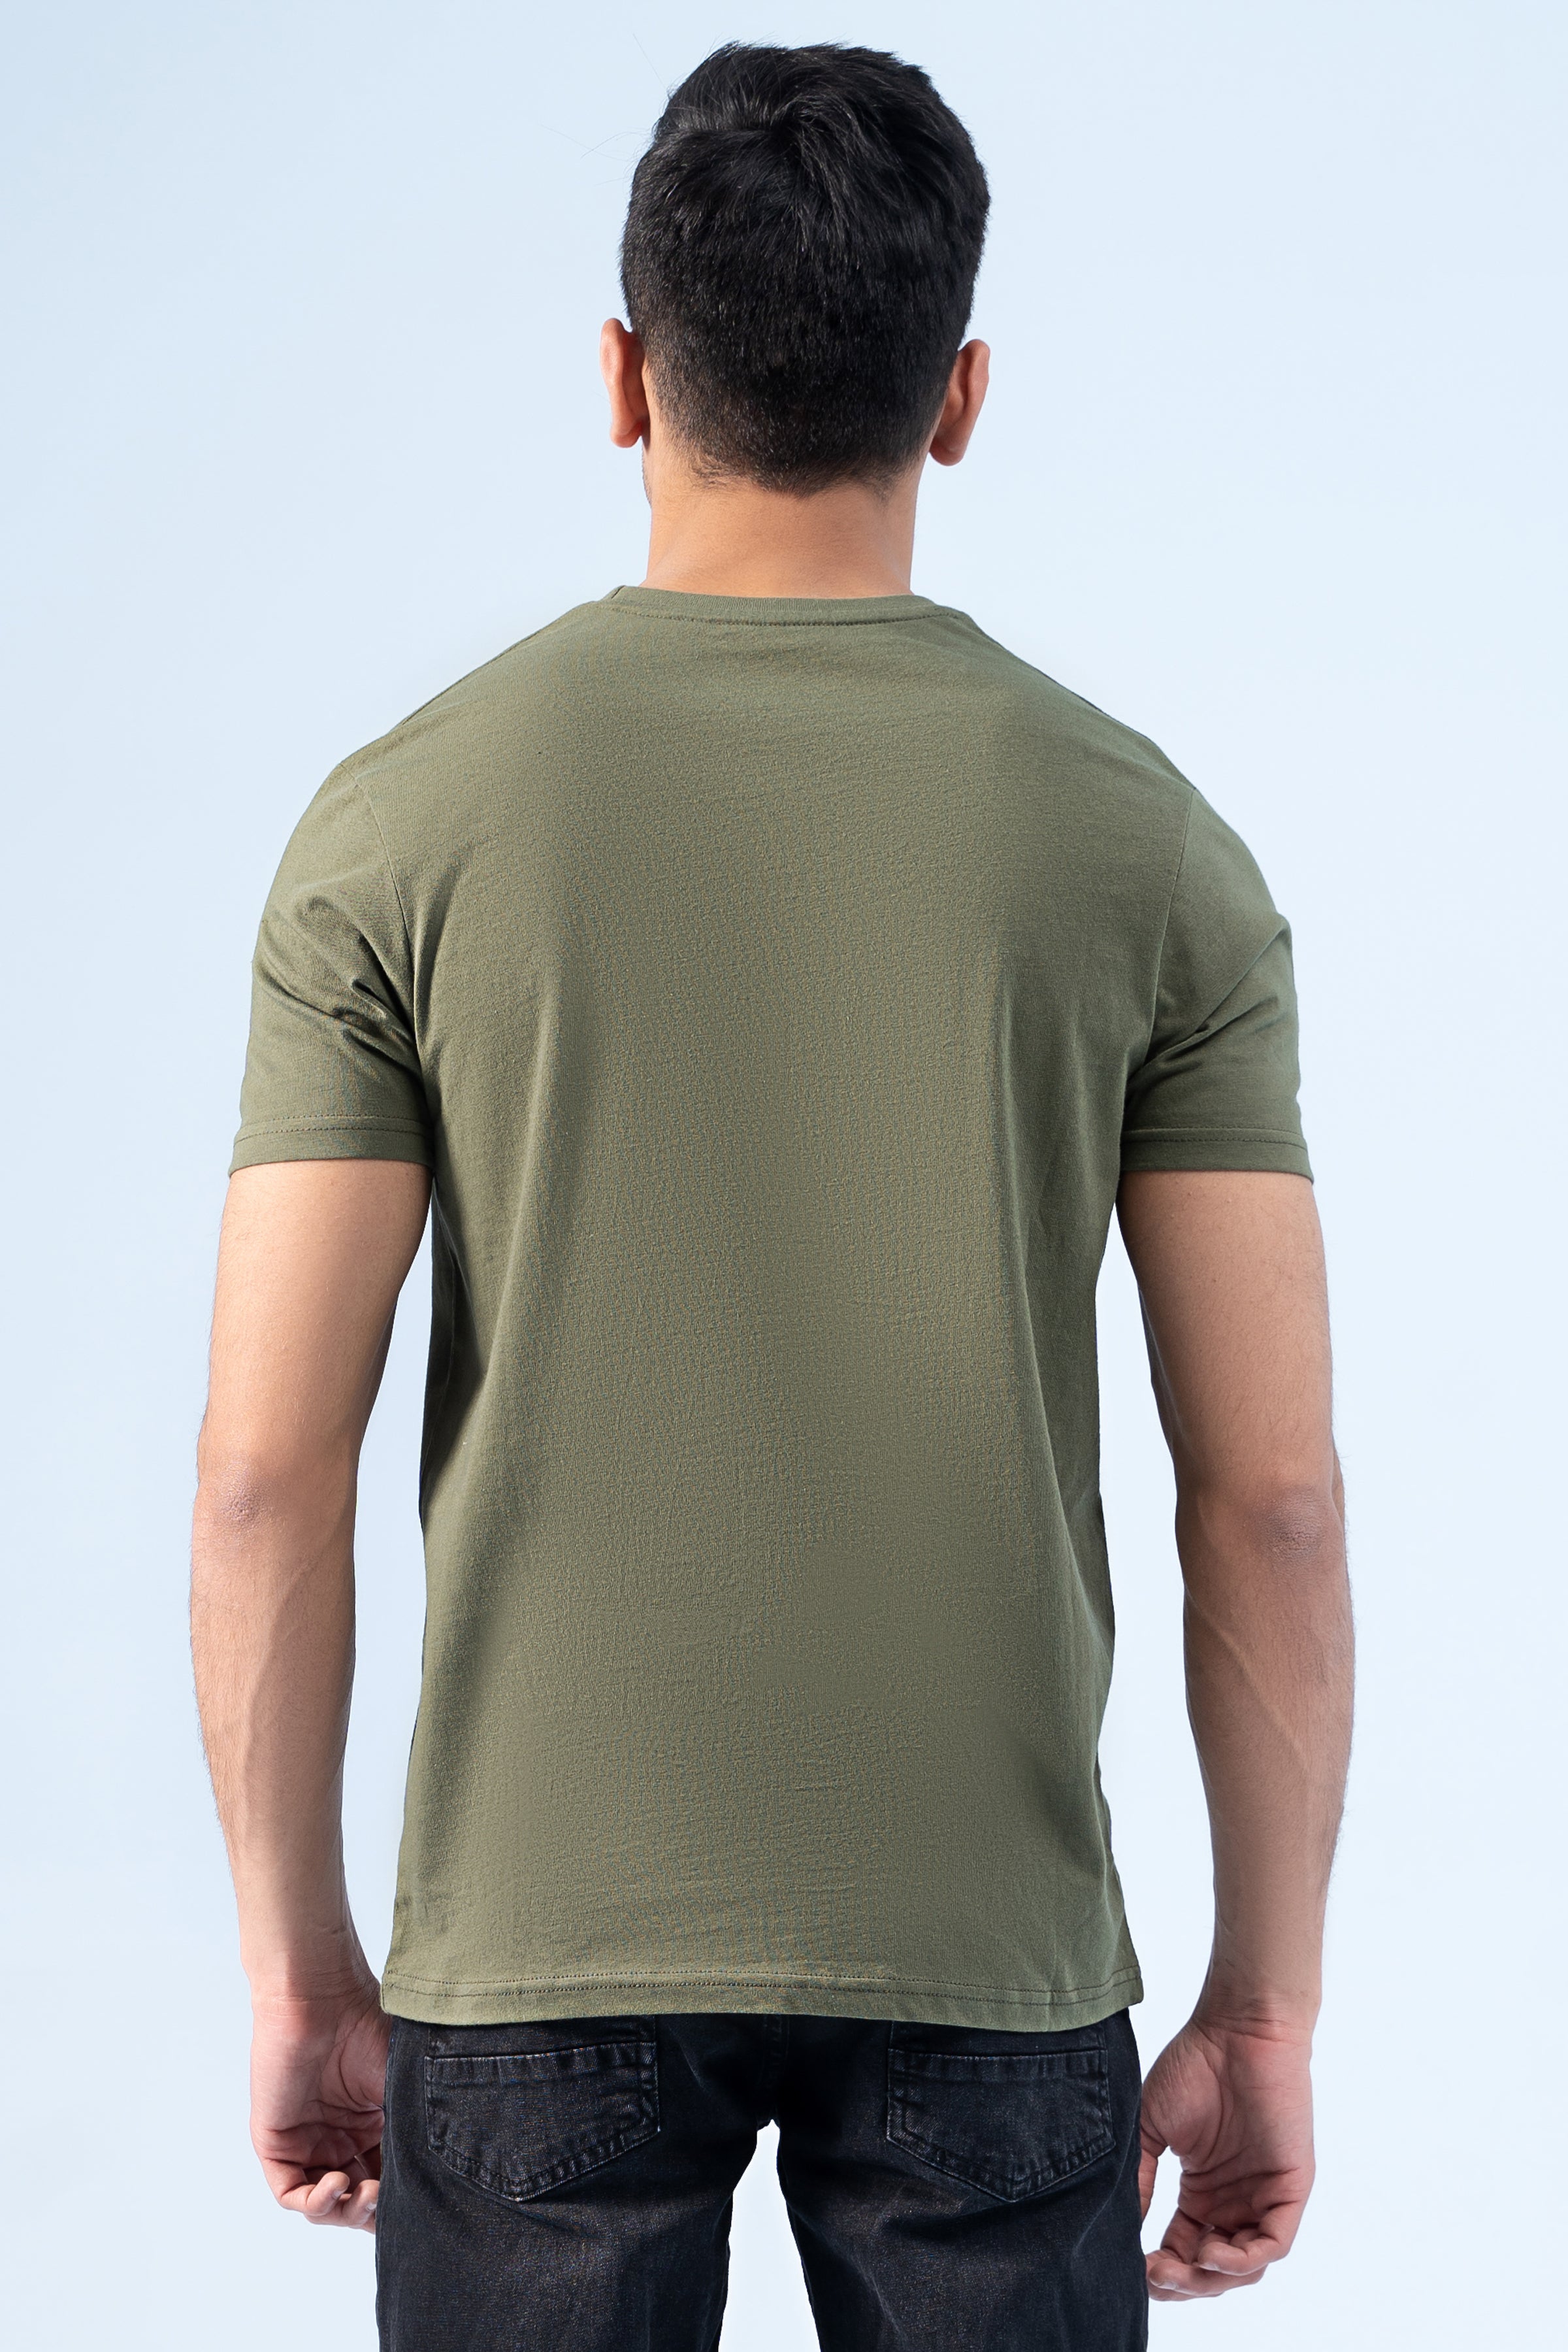 T-SHIRT OLIVE GREEN - Charcoal Clothing